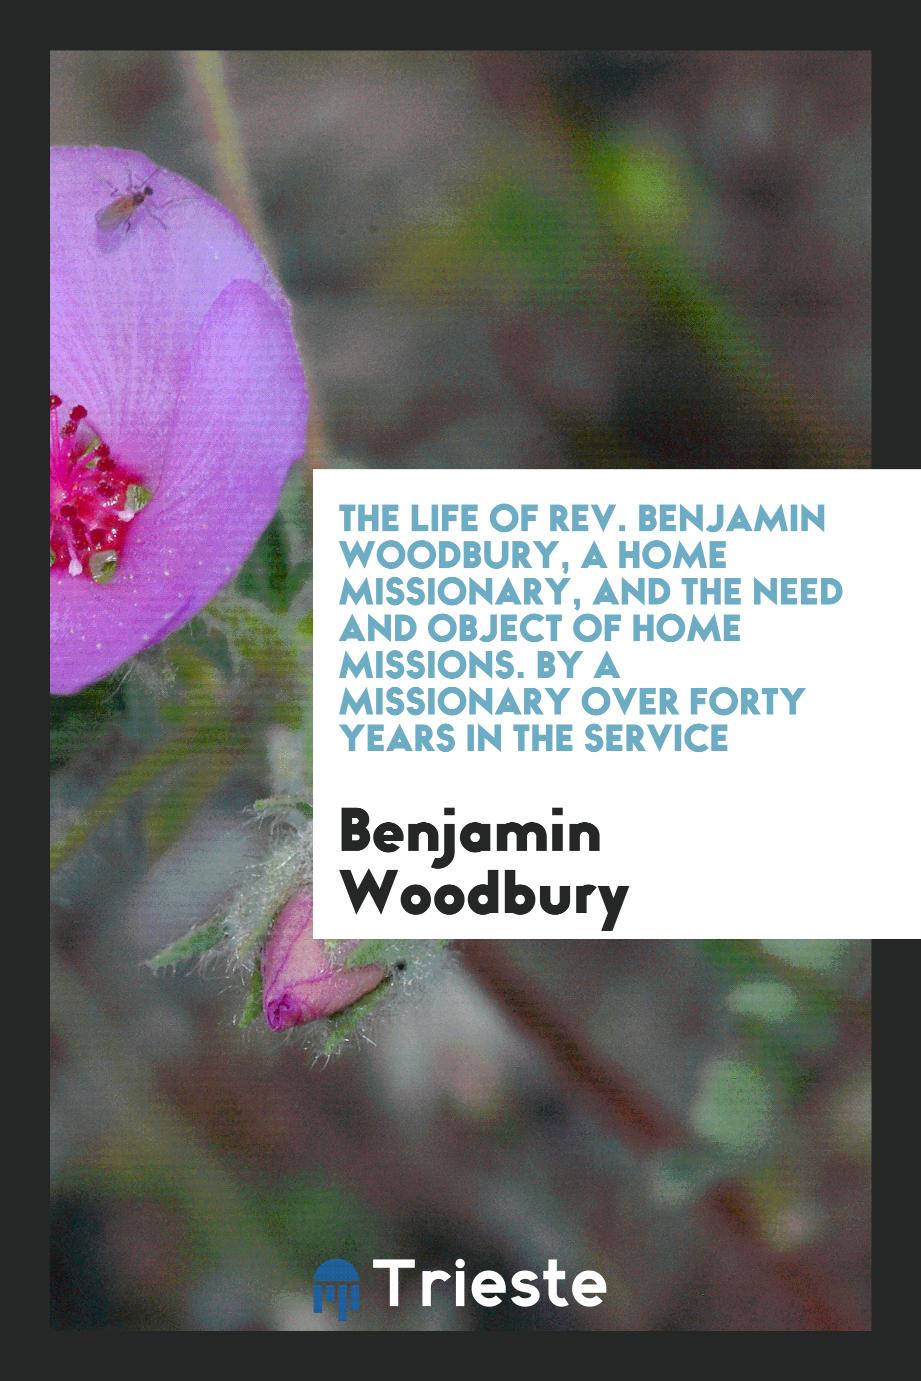 The Life of Rev. Benjamin Woodbury, a Home Missionary, and the Need and Object of Home Missions. By a Missionary over Forty Years in the Service